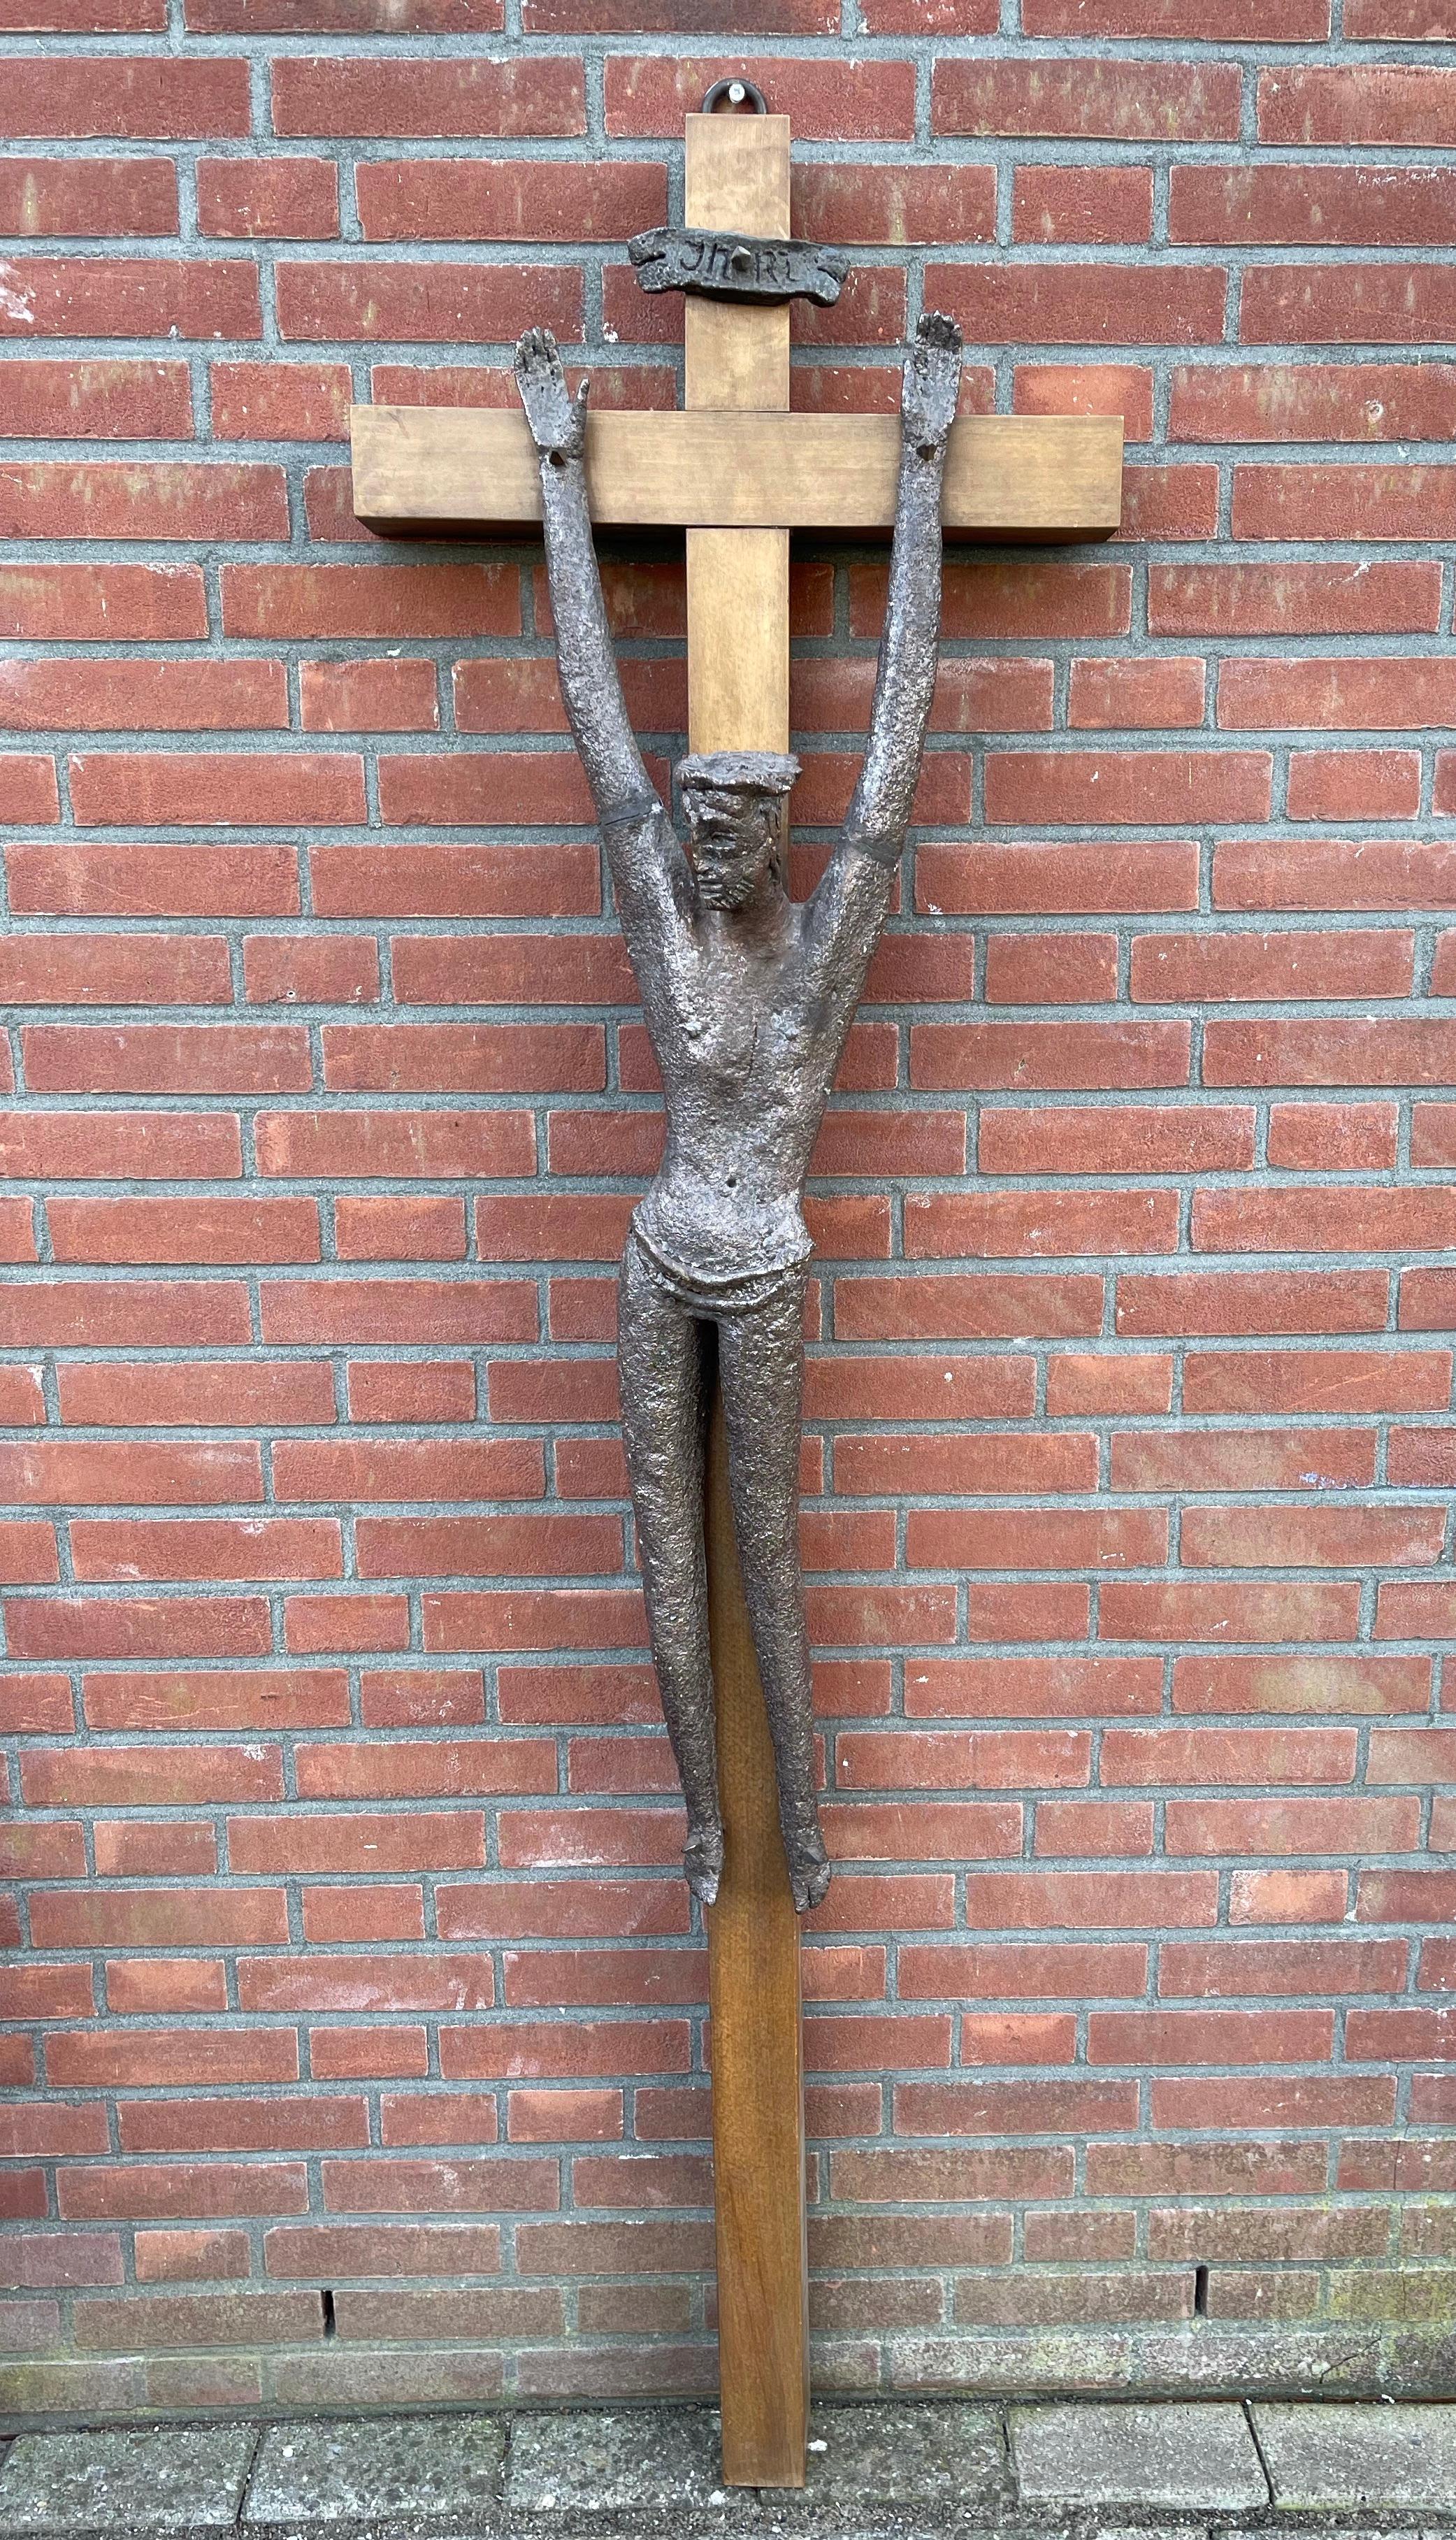 Unique and artistic crucifix from the European Midcentury Modern era.

Over the centuries the life and teachings of Christ have inspired many an artist to create His image in just as many ways as there were artist. In more recent decades the way